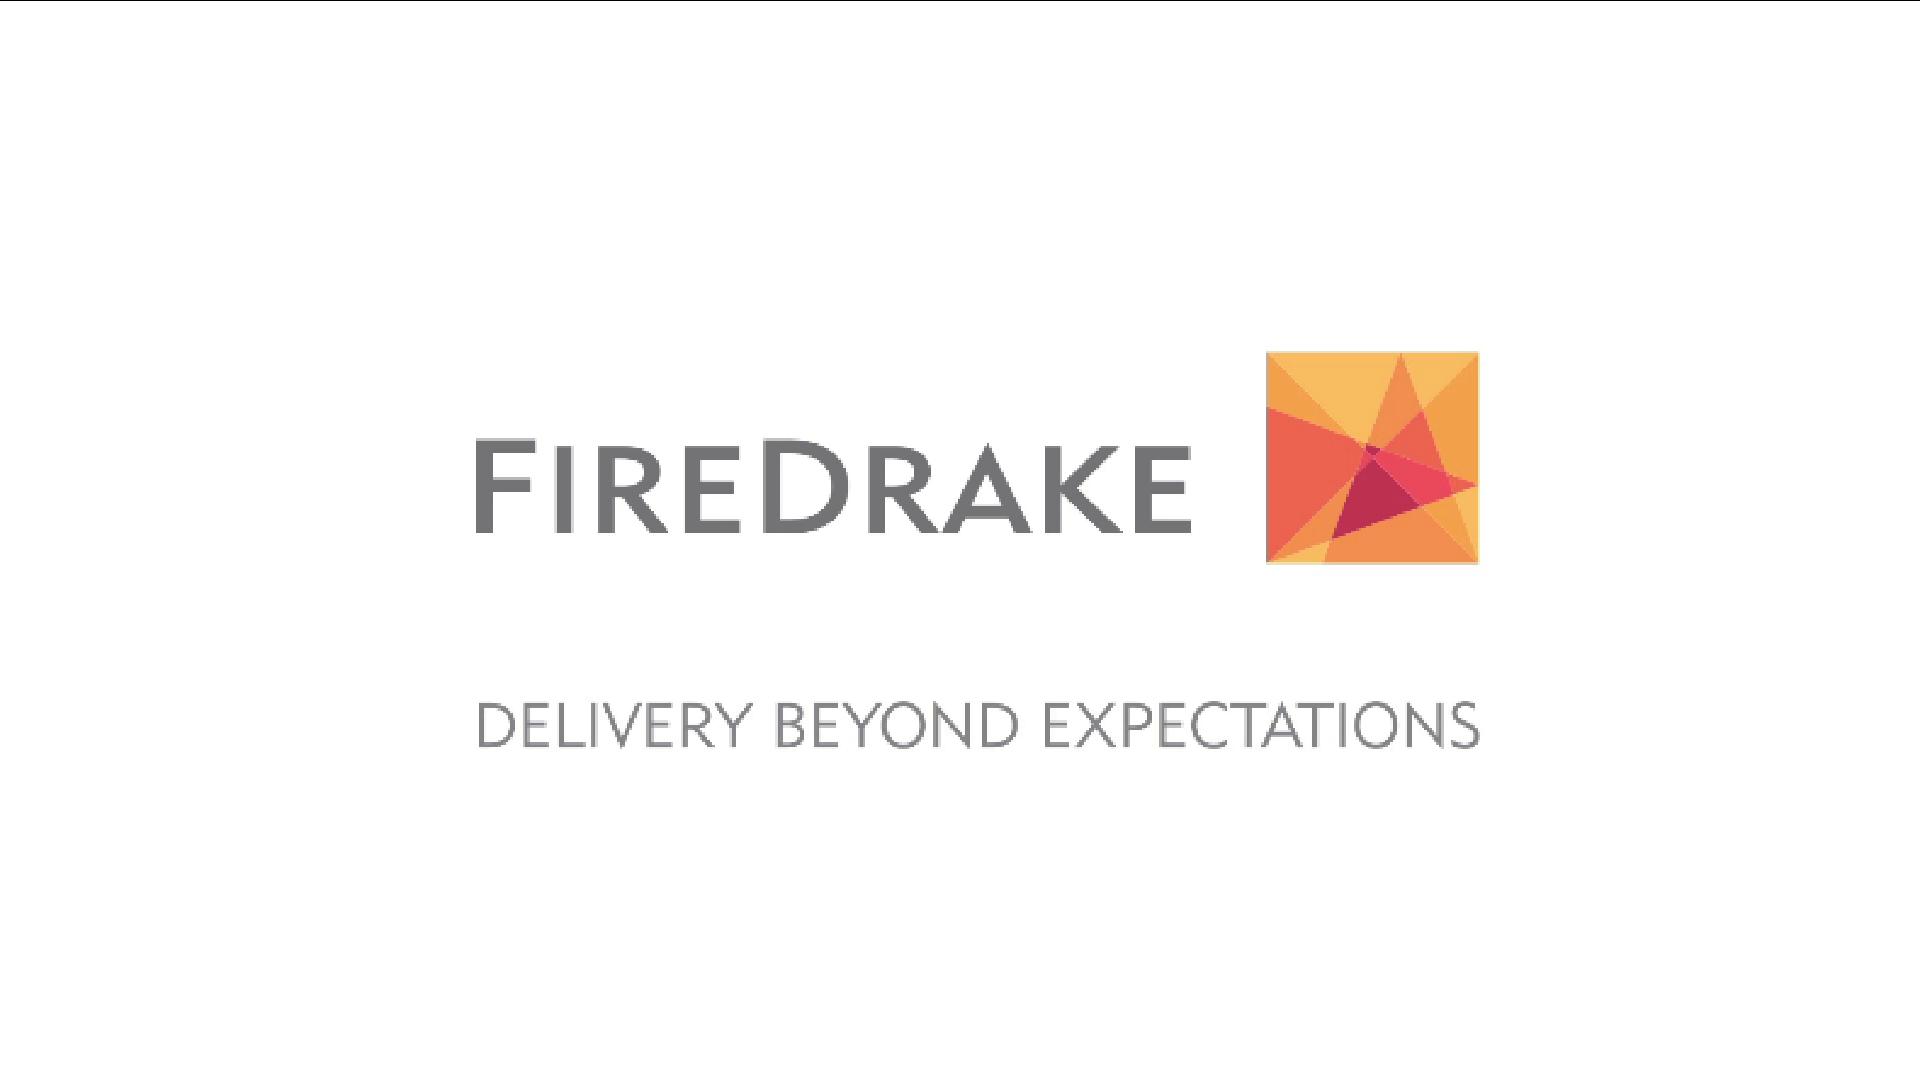 FireDrake3_AboutPage